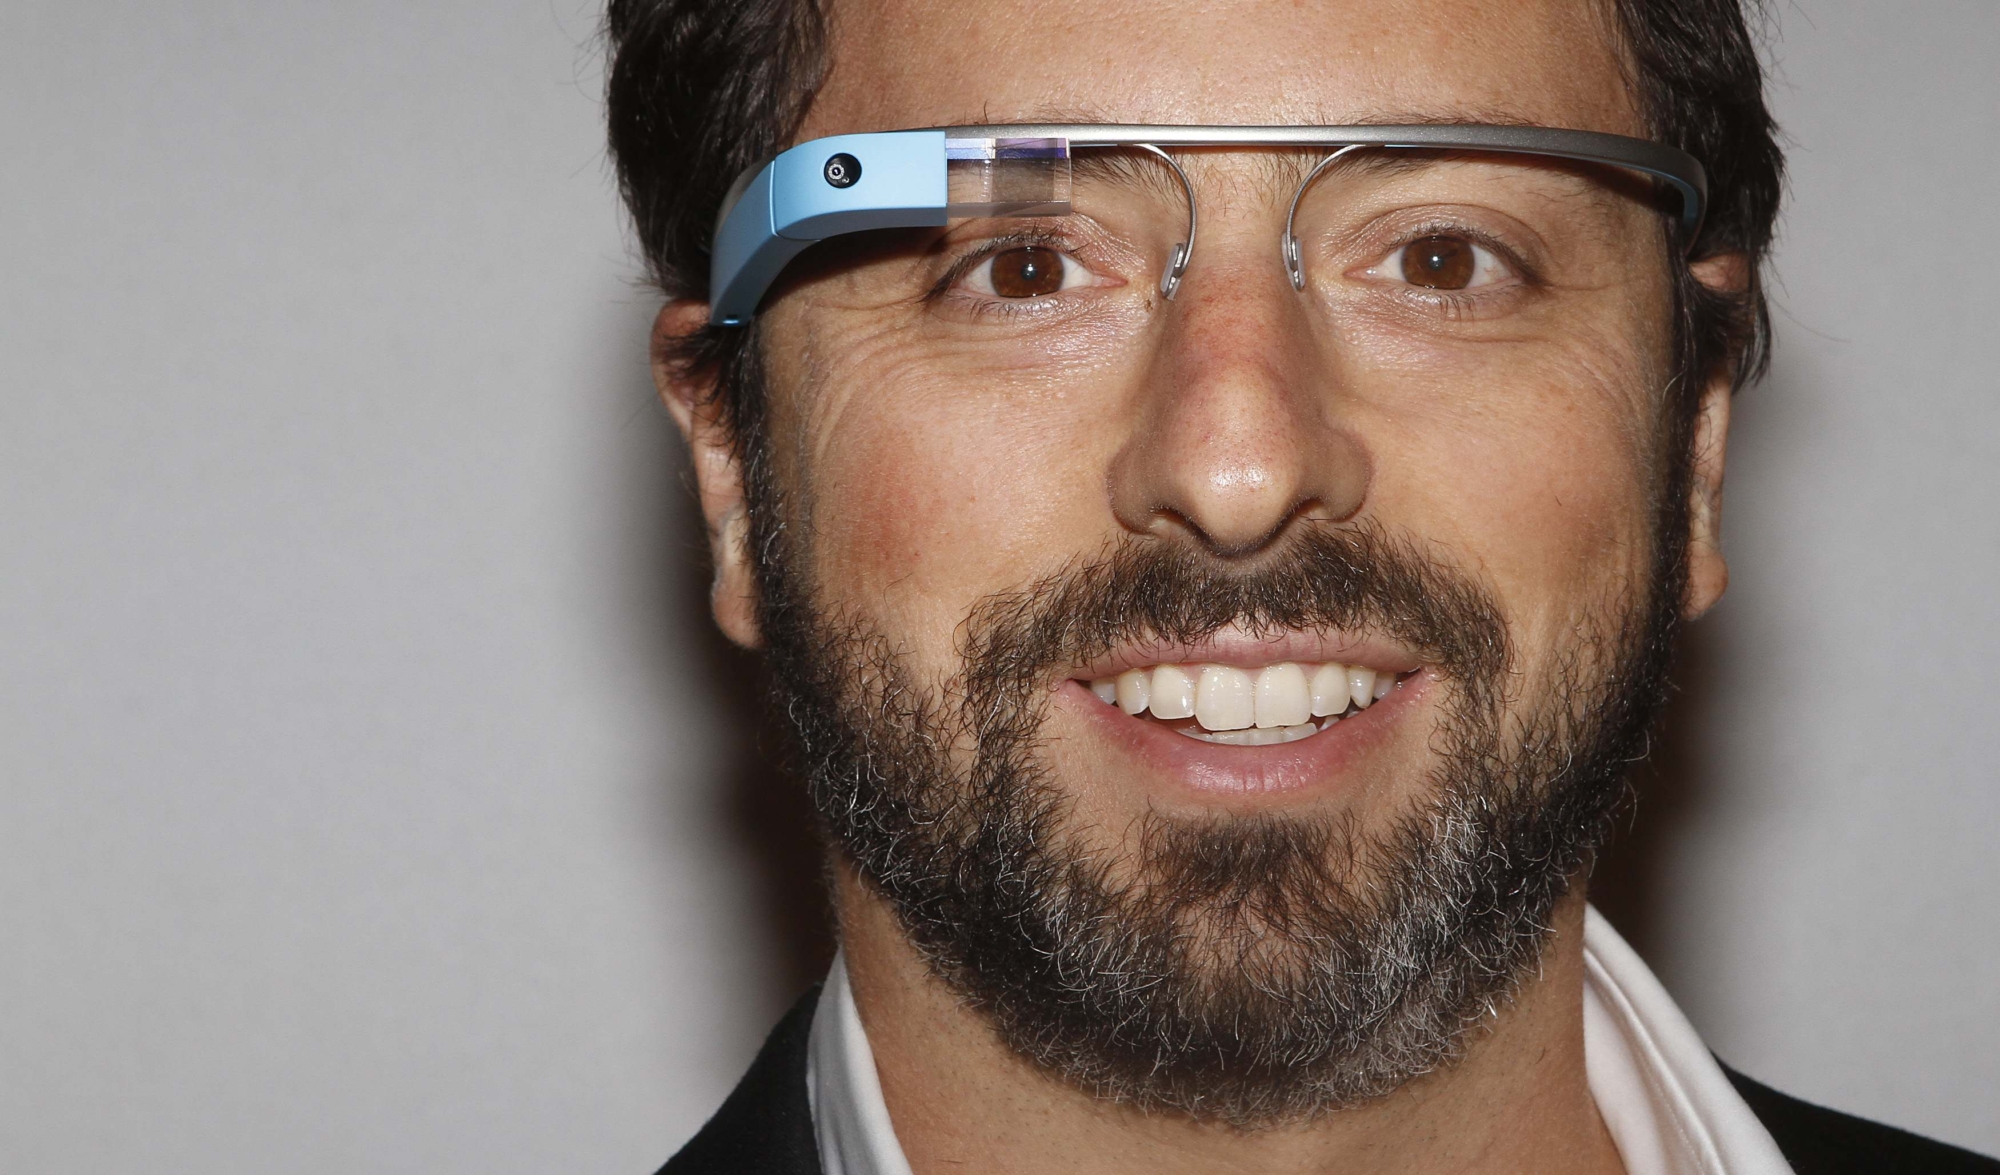 Google founder Sergey Brin poses for a portrait wearing Google Glass before the Diane von Furstenberg  Spring/Summer 2013 collection show during New York Fashion Week in this September 9, 2012 file photo. Social networking services Facebook Inc and Twitter are coming to Google Glass, the wearable computer made by the Internet search company. Google Inc announced on May 16, 2013 a half-dozen apps specially designed to work on its Glass devices. REUTERS/Carlo Allegri/Files (UNITED STATES - Tags: FASHION SCIENCE TECHNOLOGY BUSINESS) - File photo of Google founder Sergey Brin posing for a portrait wearing Google Glass during New York Fashion Week